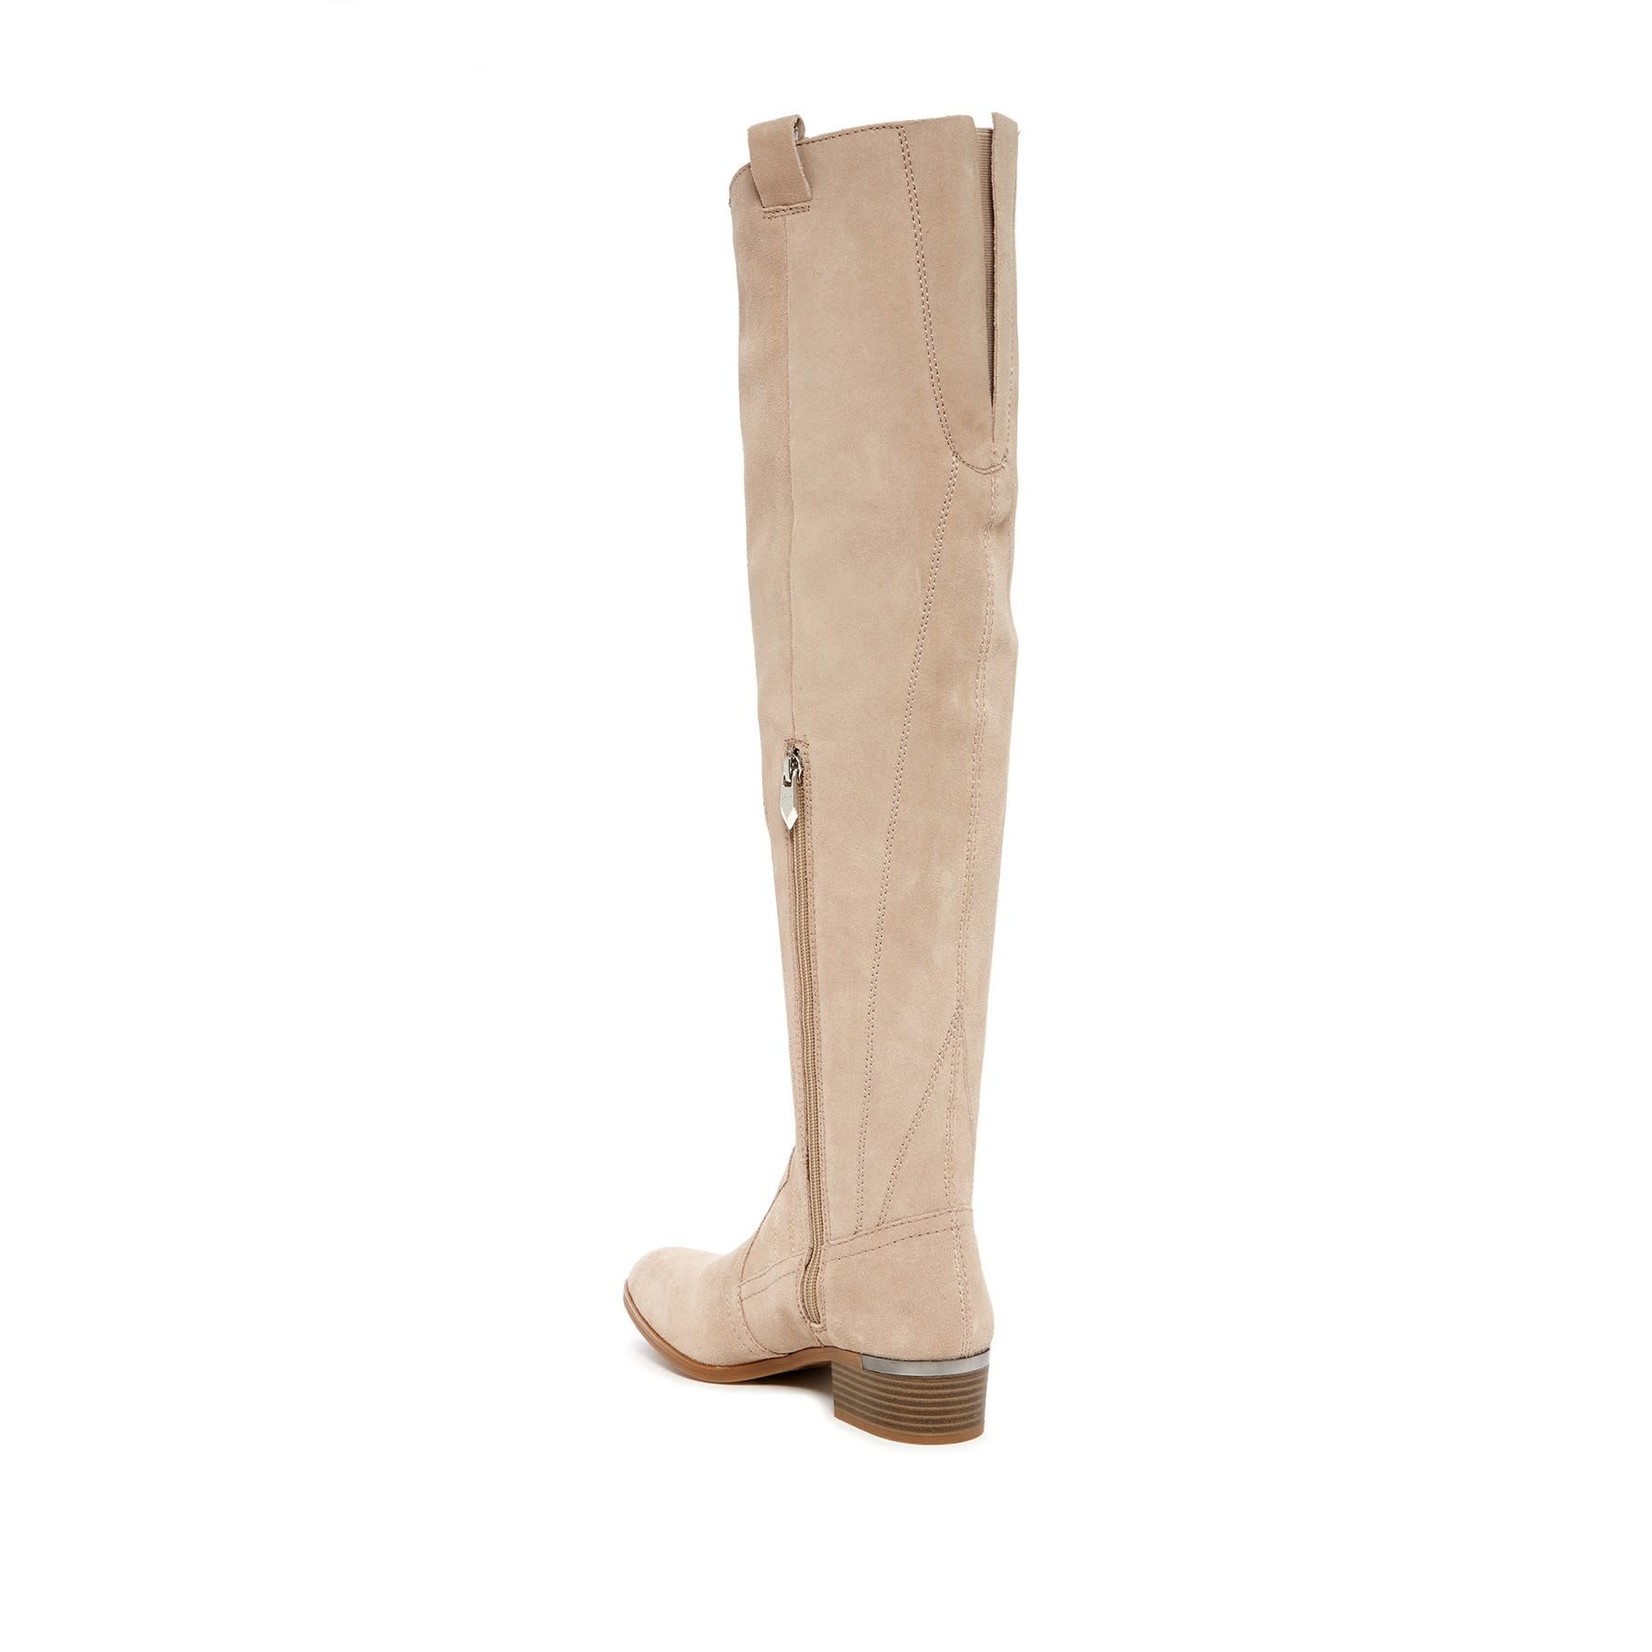 Fergie Footwear Women's Romance Over-The-Knee Boot,Portico Leather